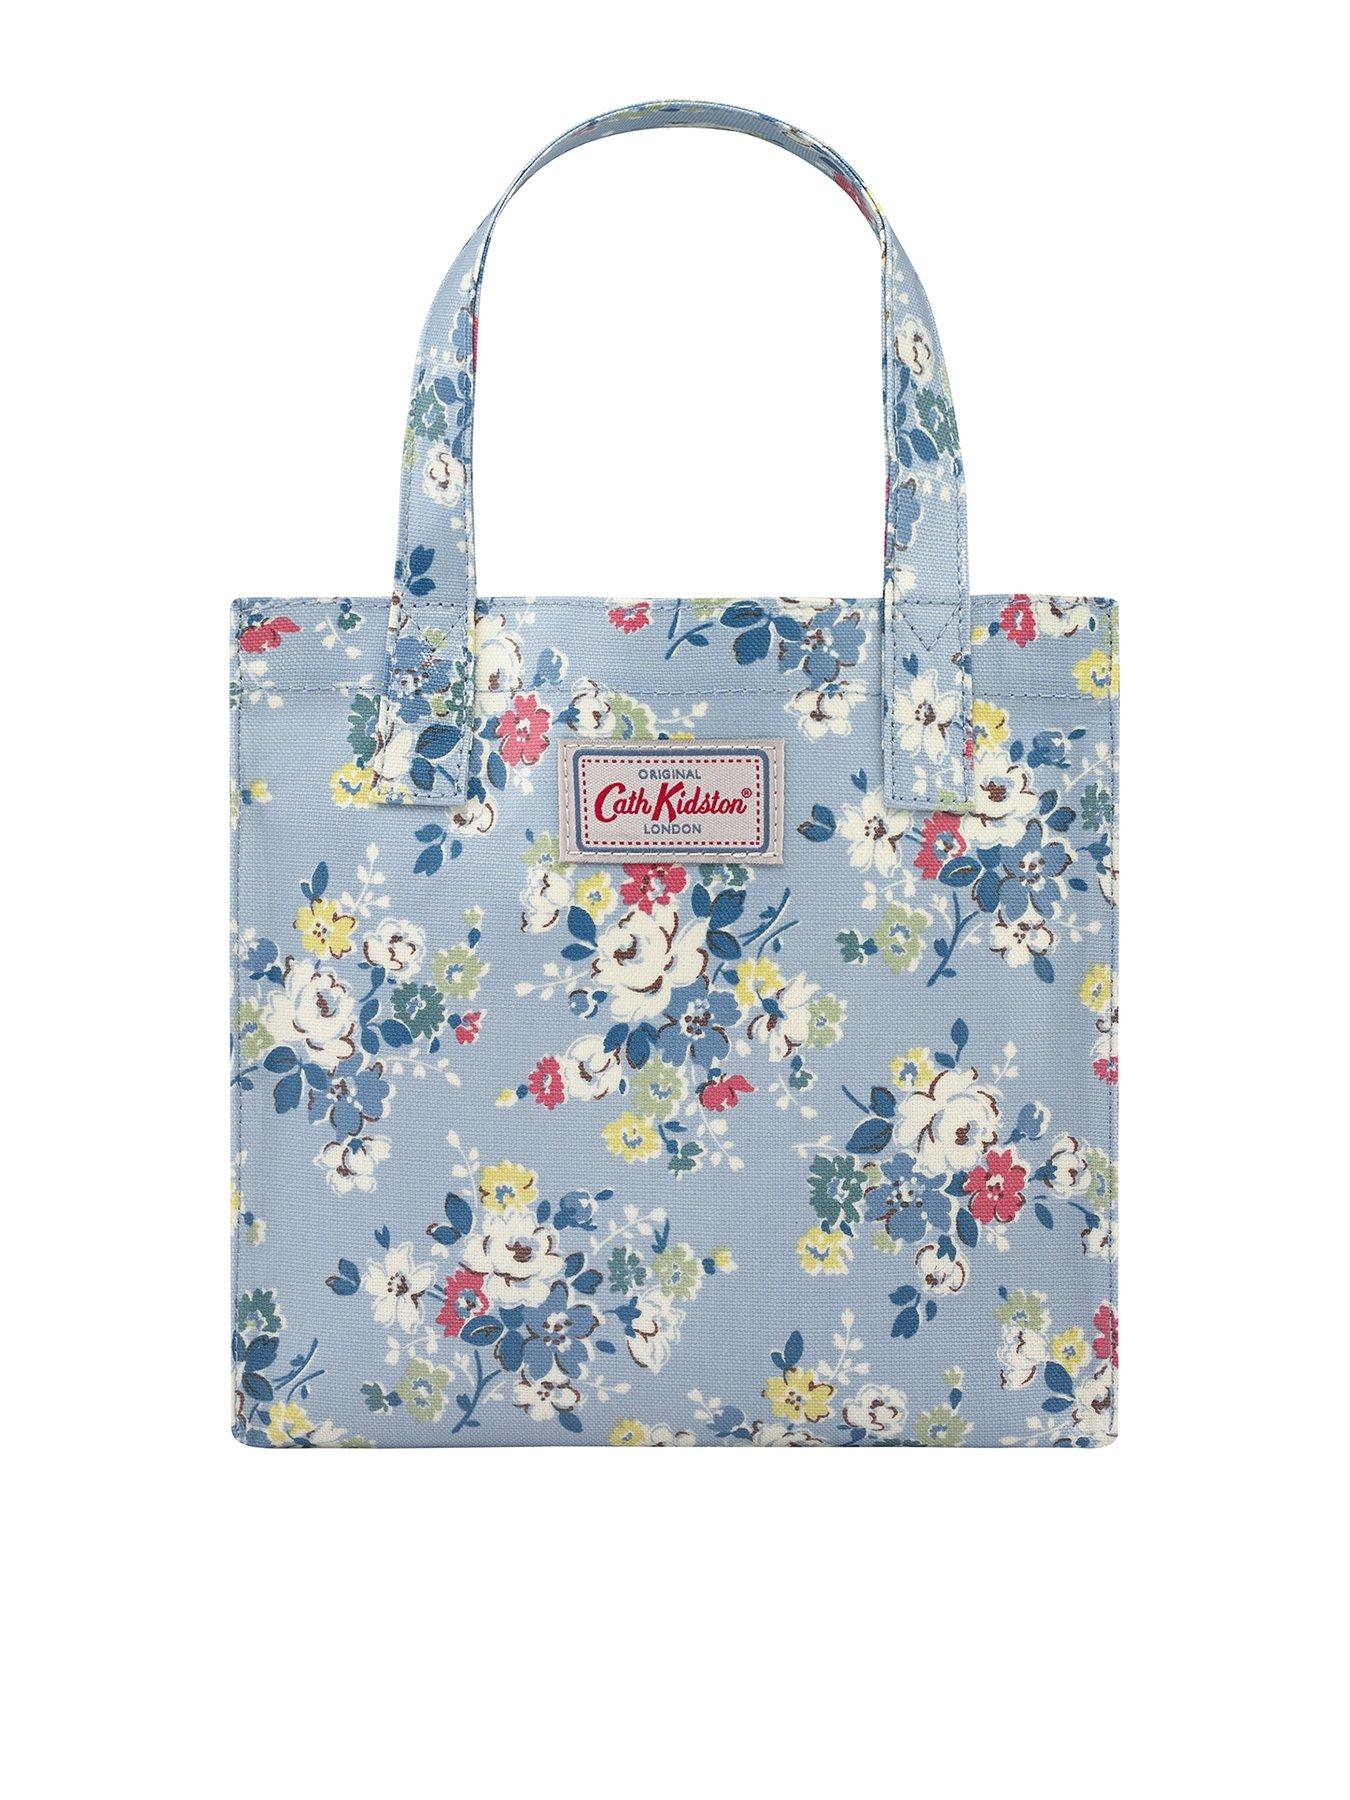 cath kidston online outlet